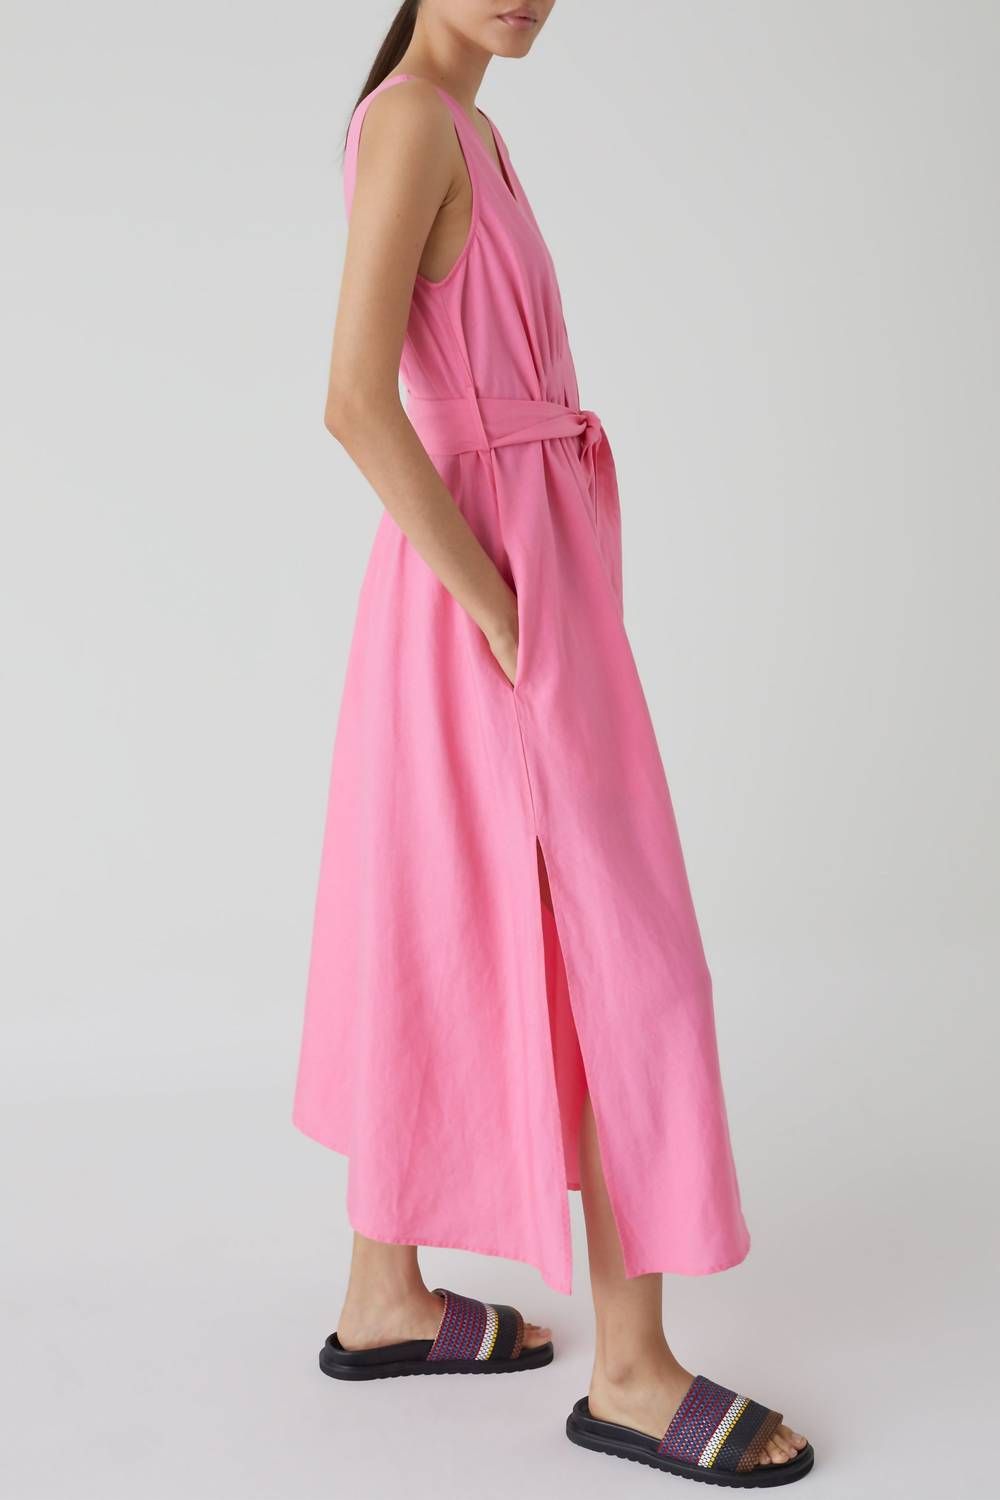 Style 1-2452146456-2901 CLOSED Size M Pink Cocktail Dress on Queenly